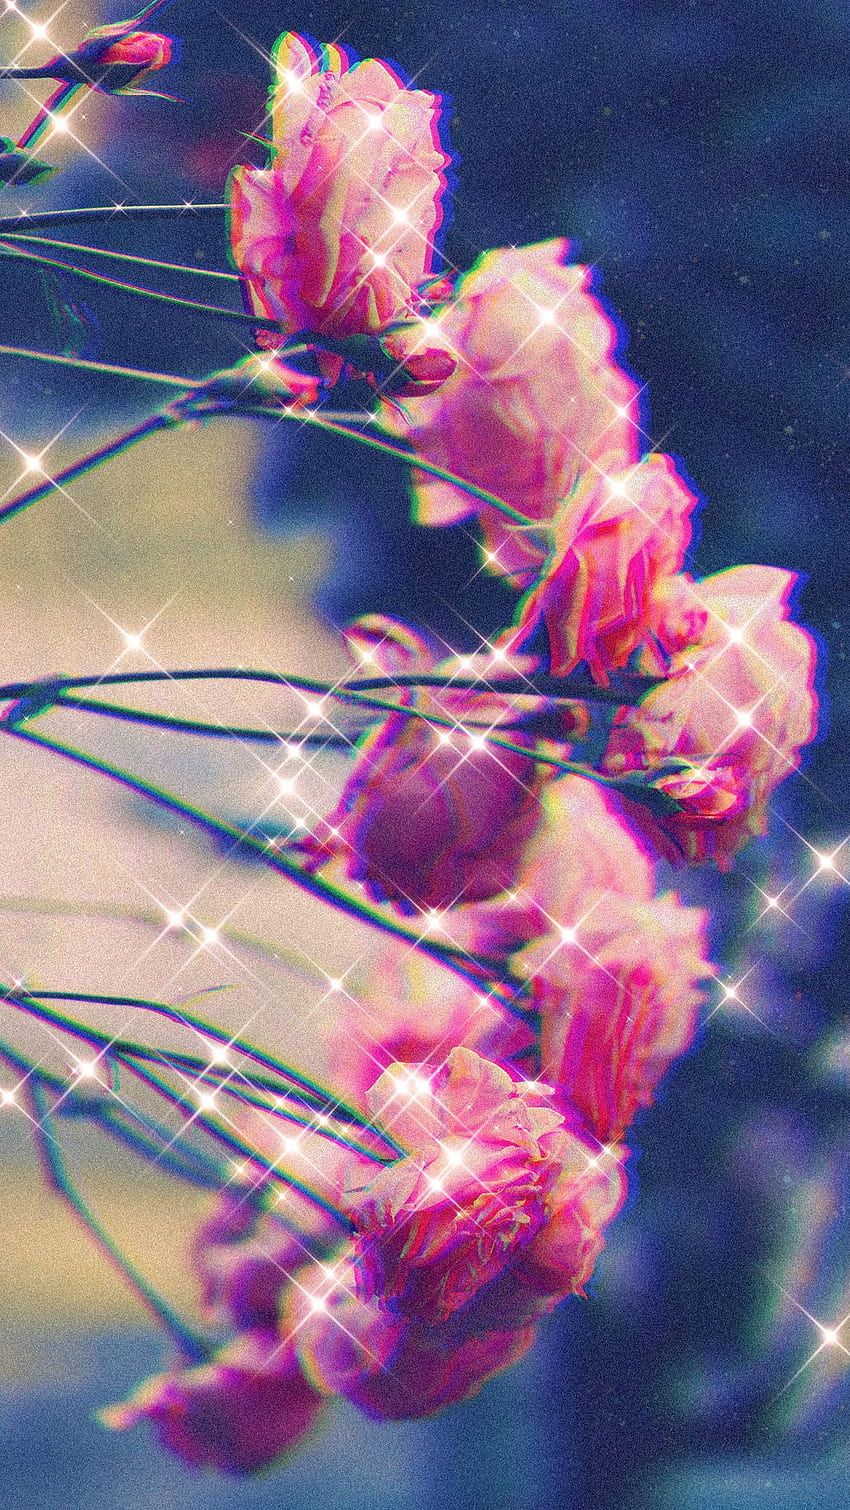 Aesthetic background of pink flowers with sparkles - Android